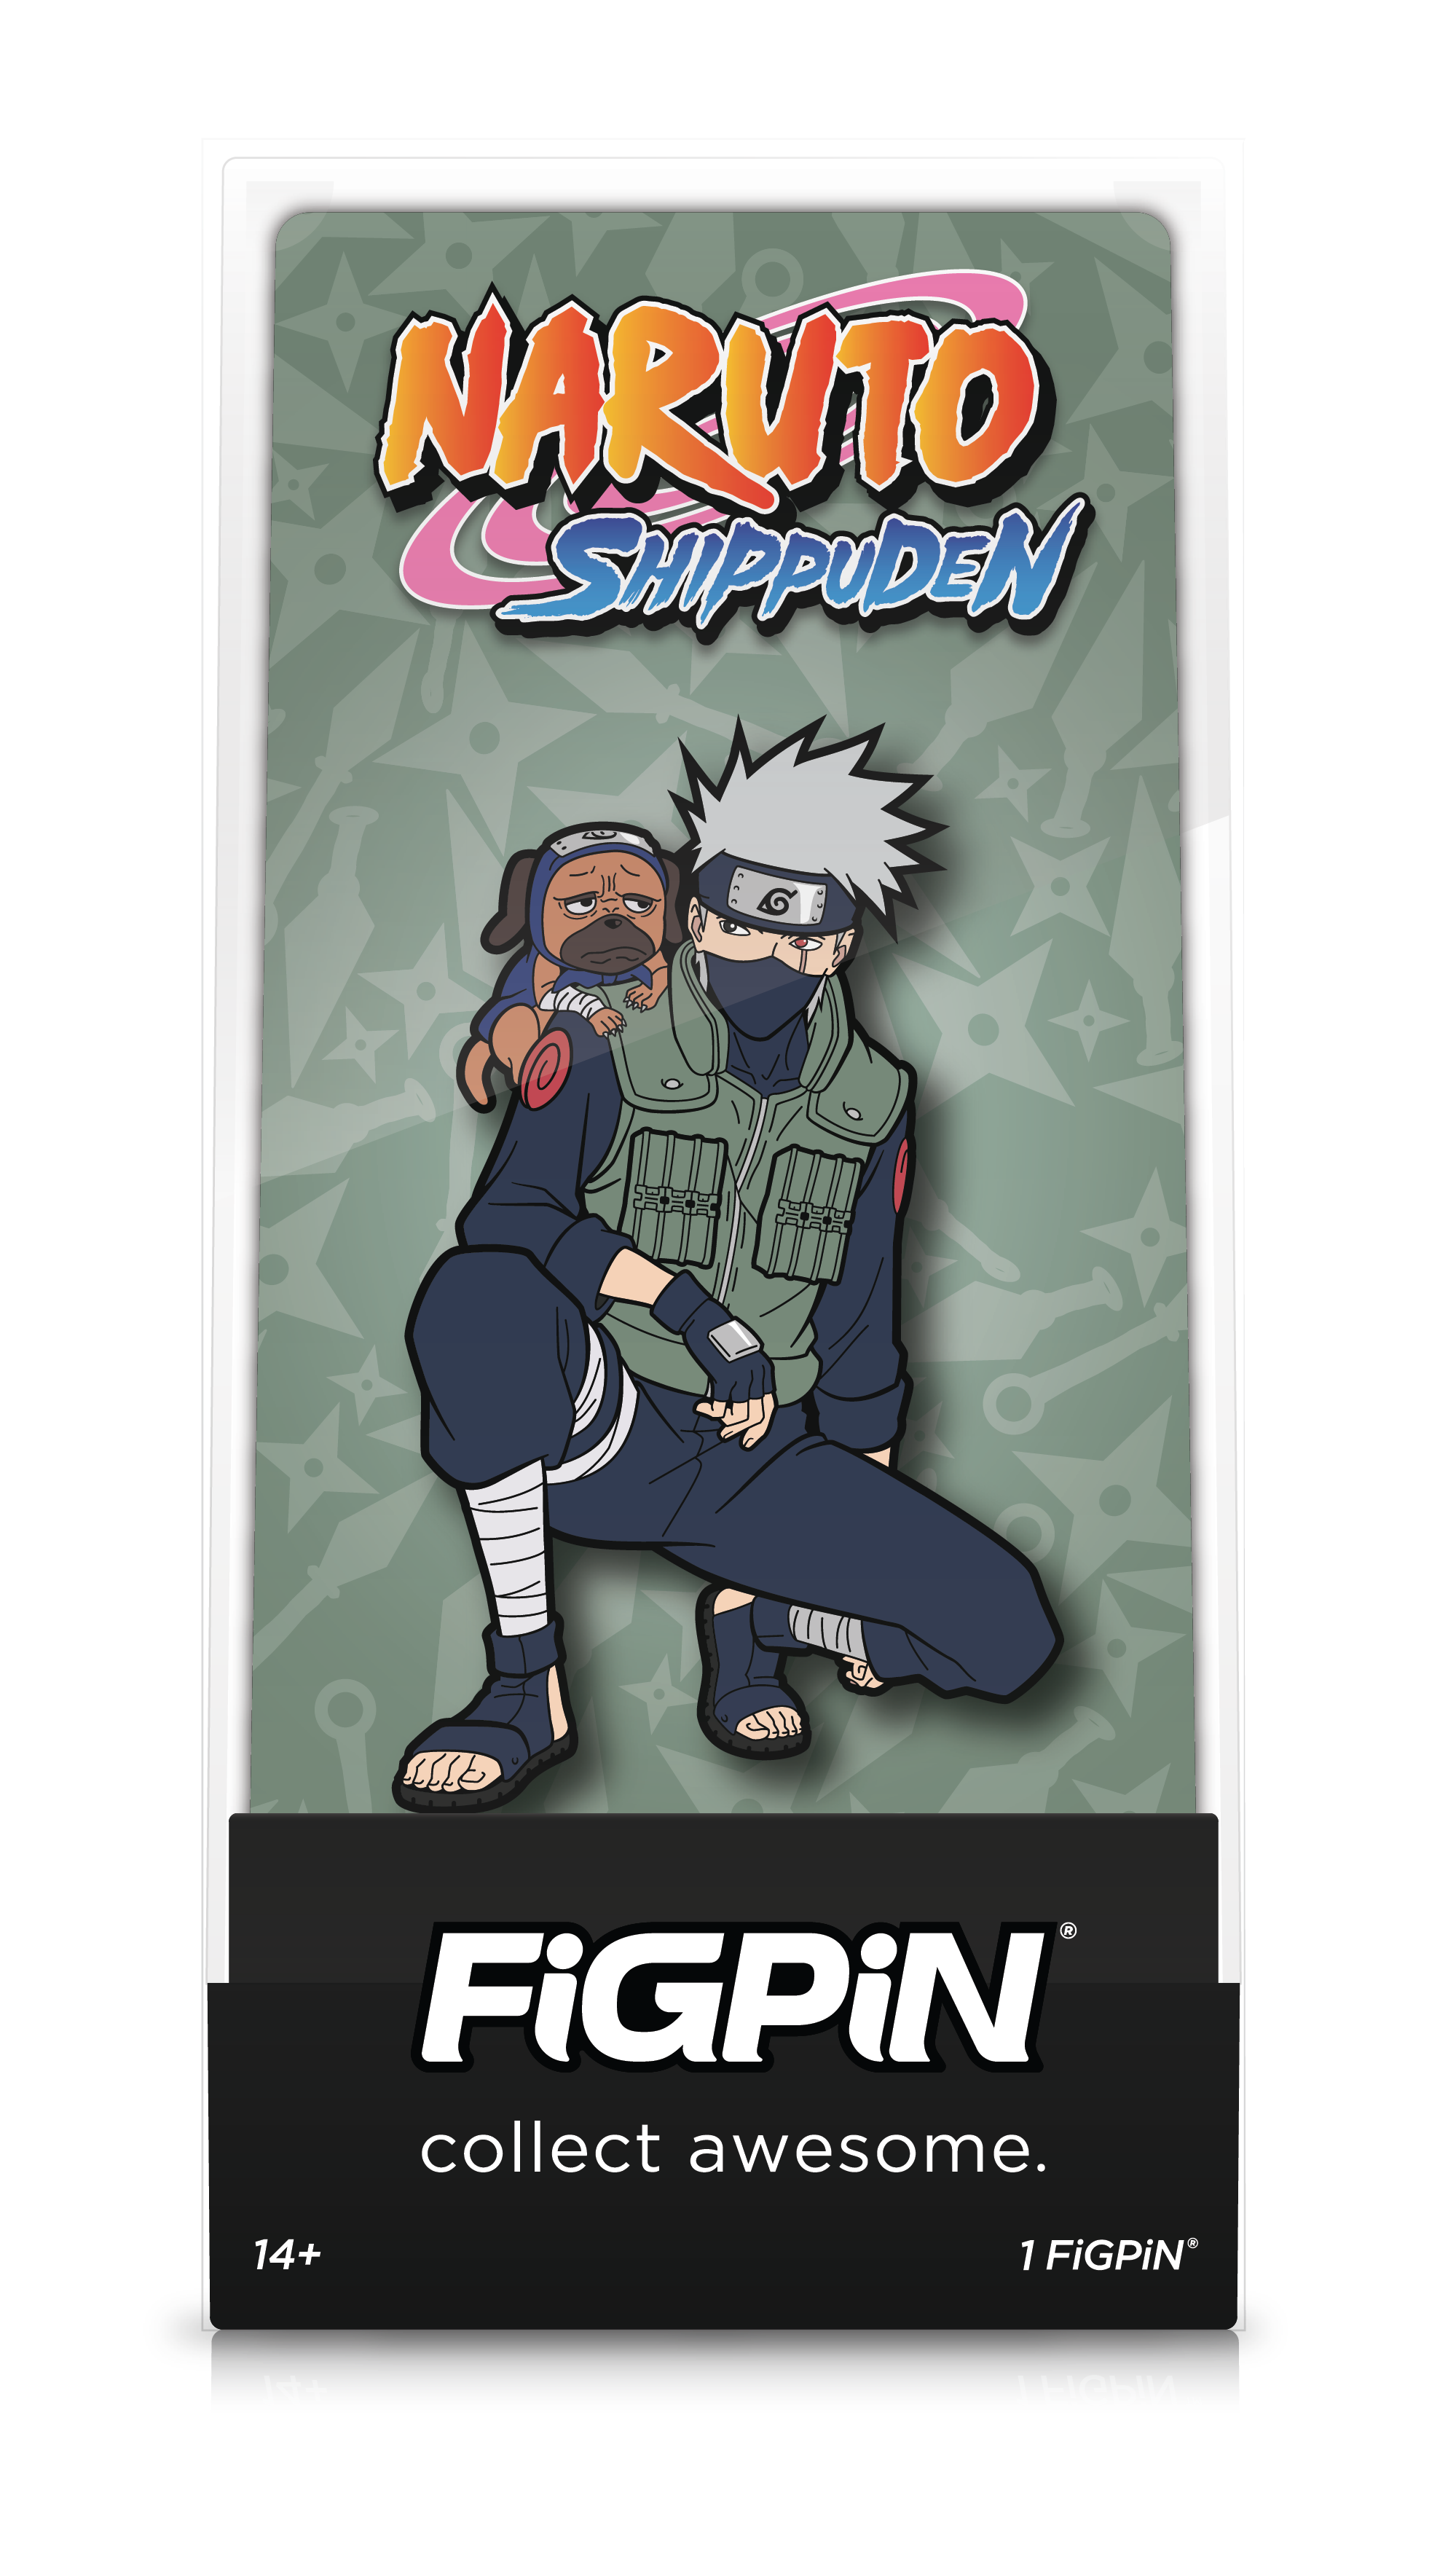 Front view of Naruto Shippuden's Kakashi enamel pin inside FiGPiN Display case reading “collect awesome"